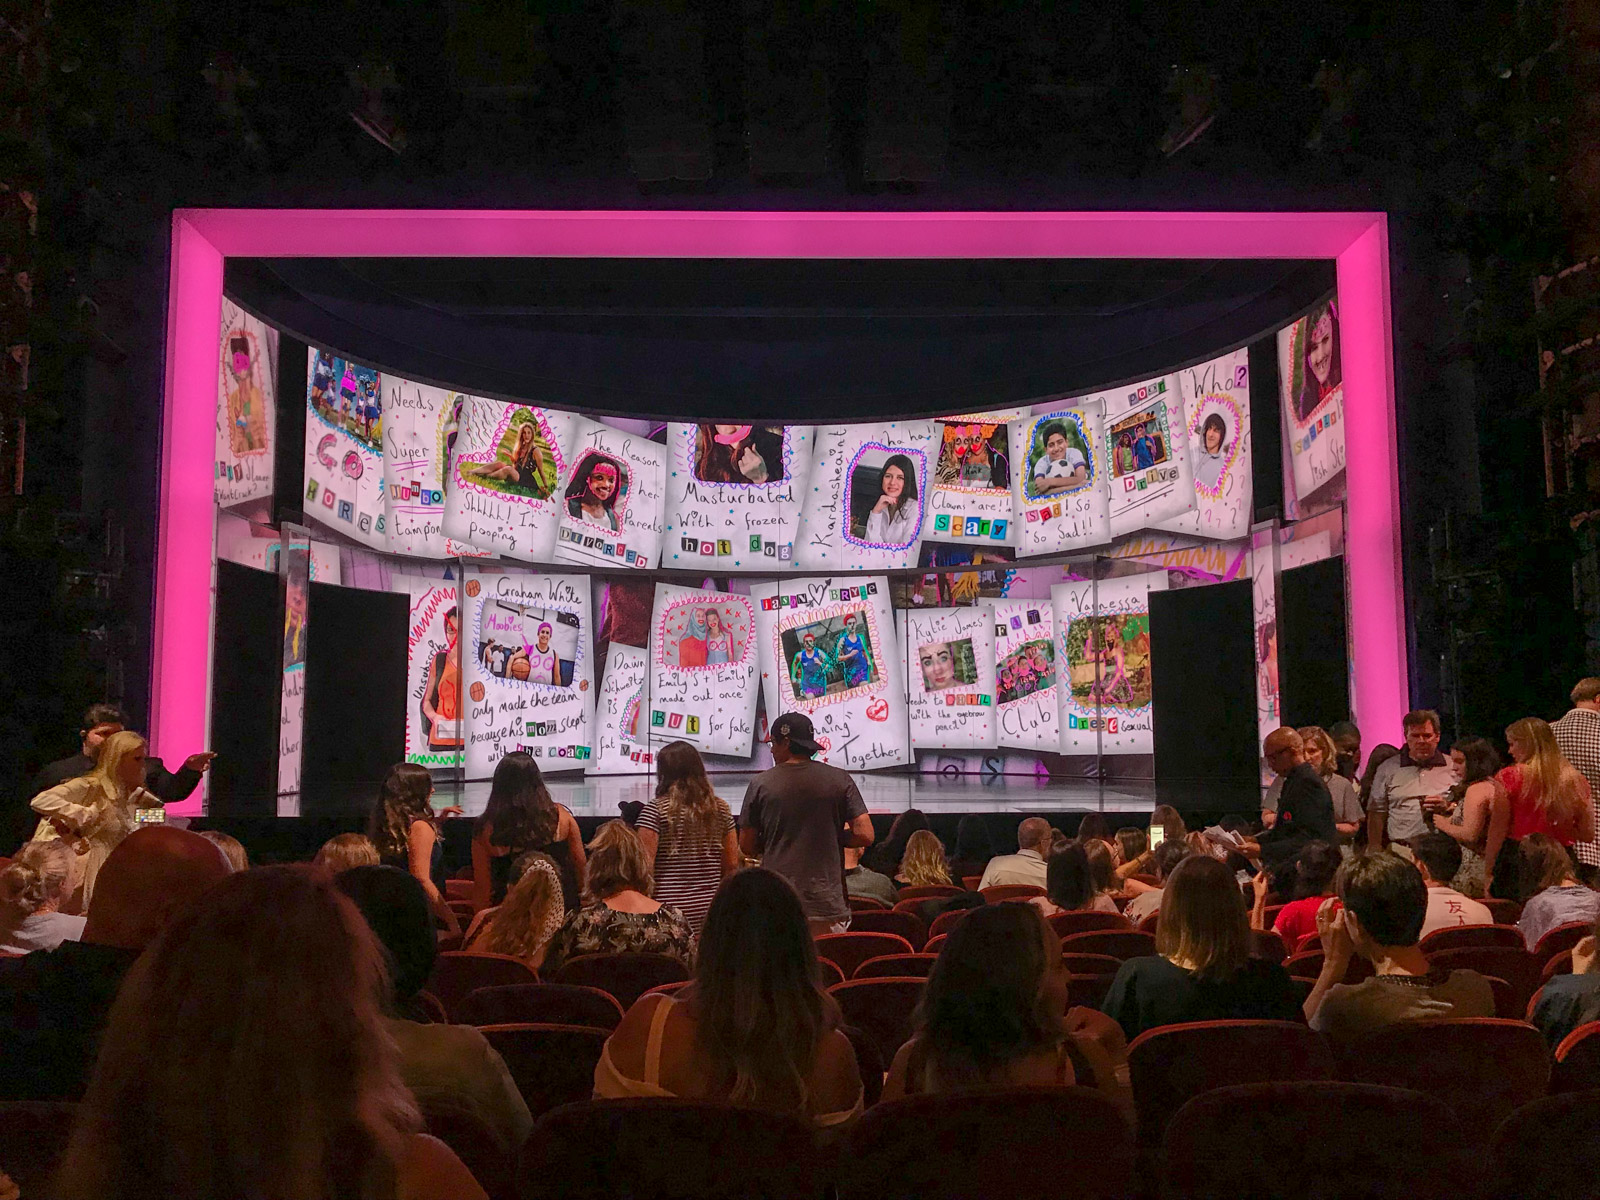 The inside of a theatre with audience members both sitting and making their way to their seats. The stage is ready with a digital backdrop resembling a scrapbook of photos and comments